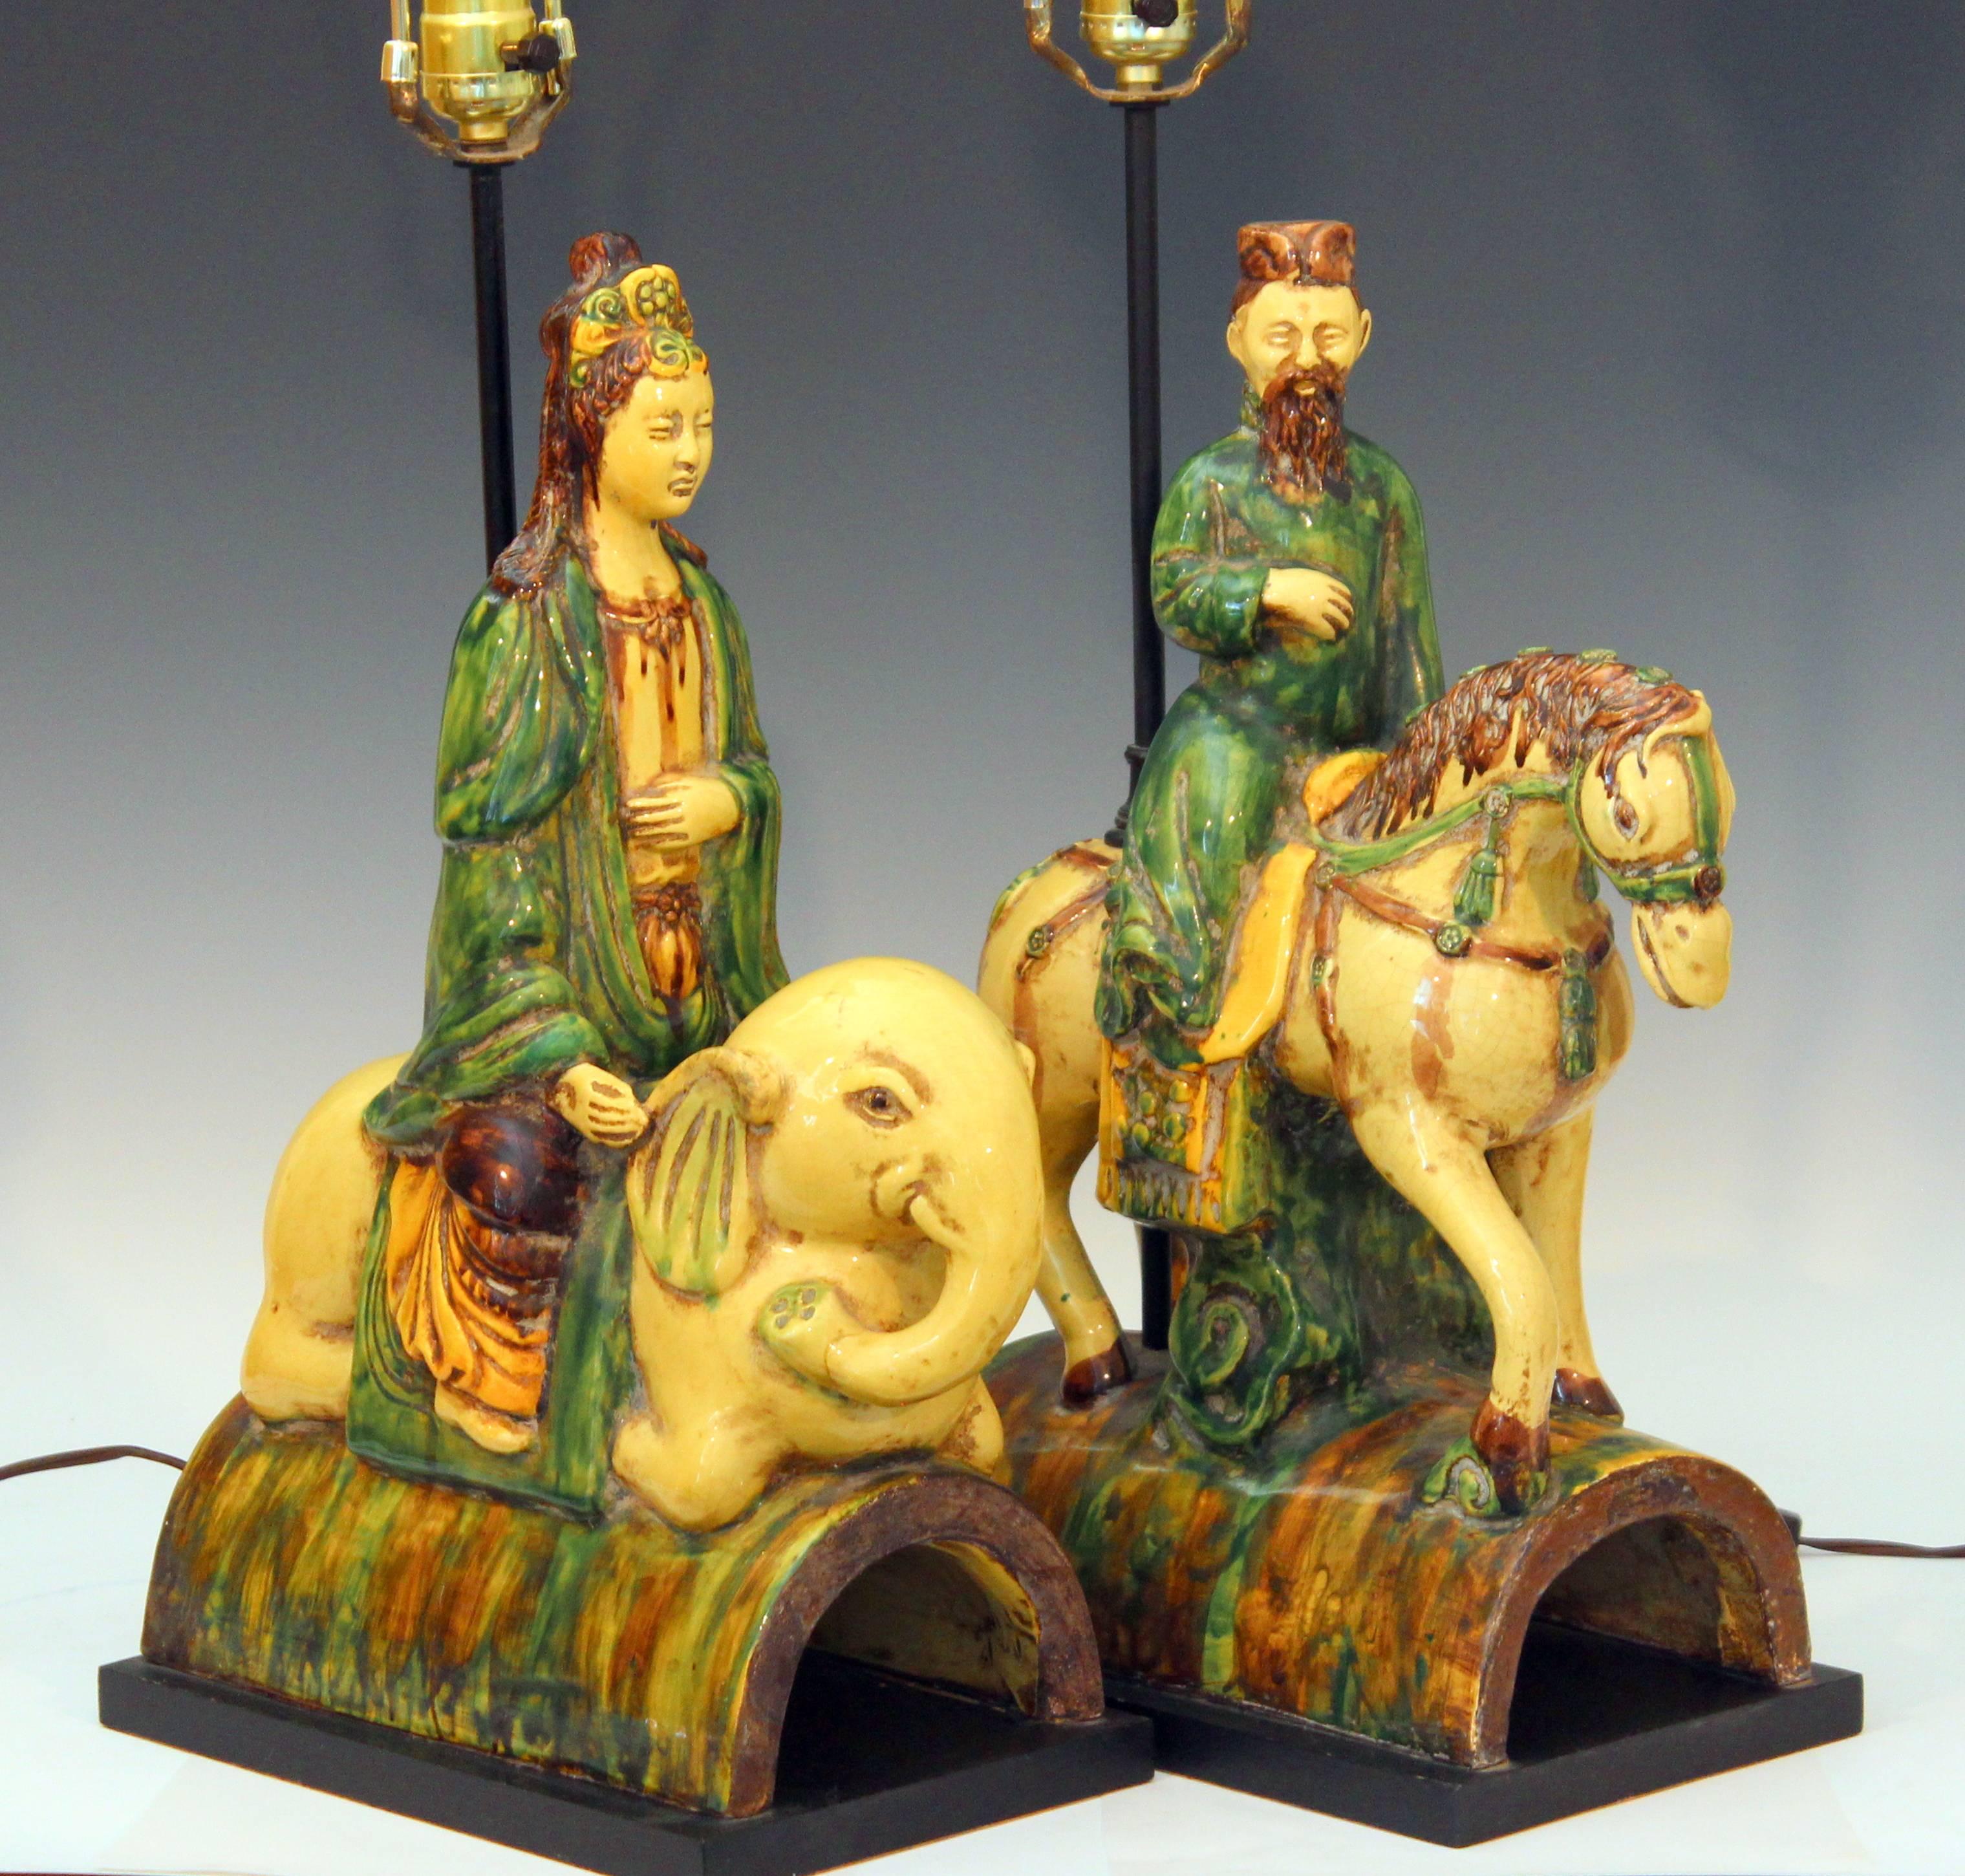 Pair of Italian Zaccagnini pottery lamps modeled after Chinese Ming Dynasty roof tiles in the form of Bodhisattvas mounted on elephant and horseback and decorated in three color sancai glaze, circa 1950s-1960s. Fun and spiritual! 30" high